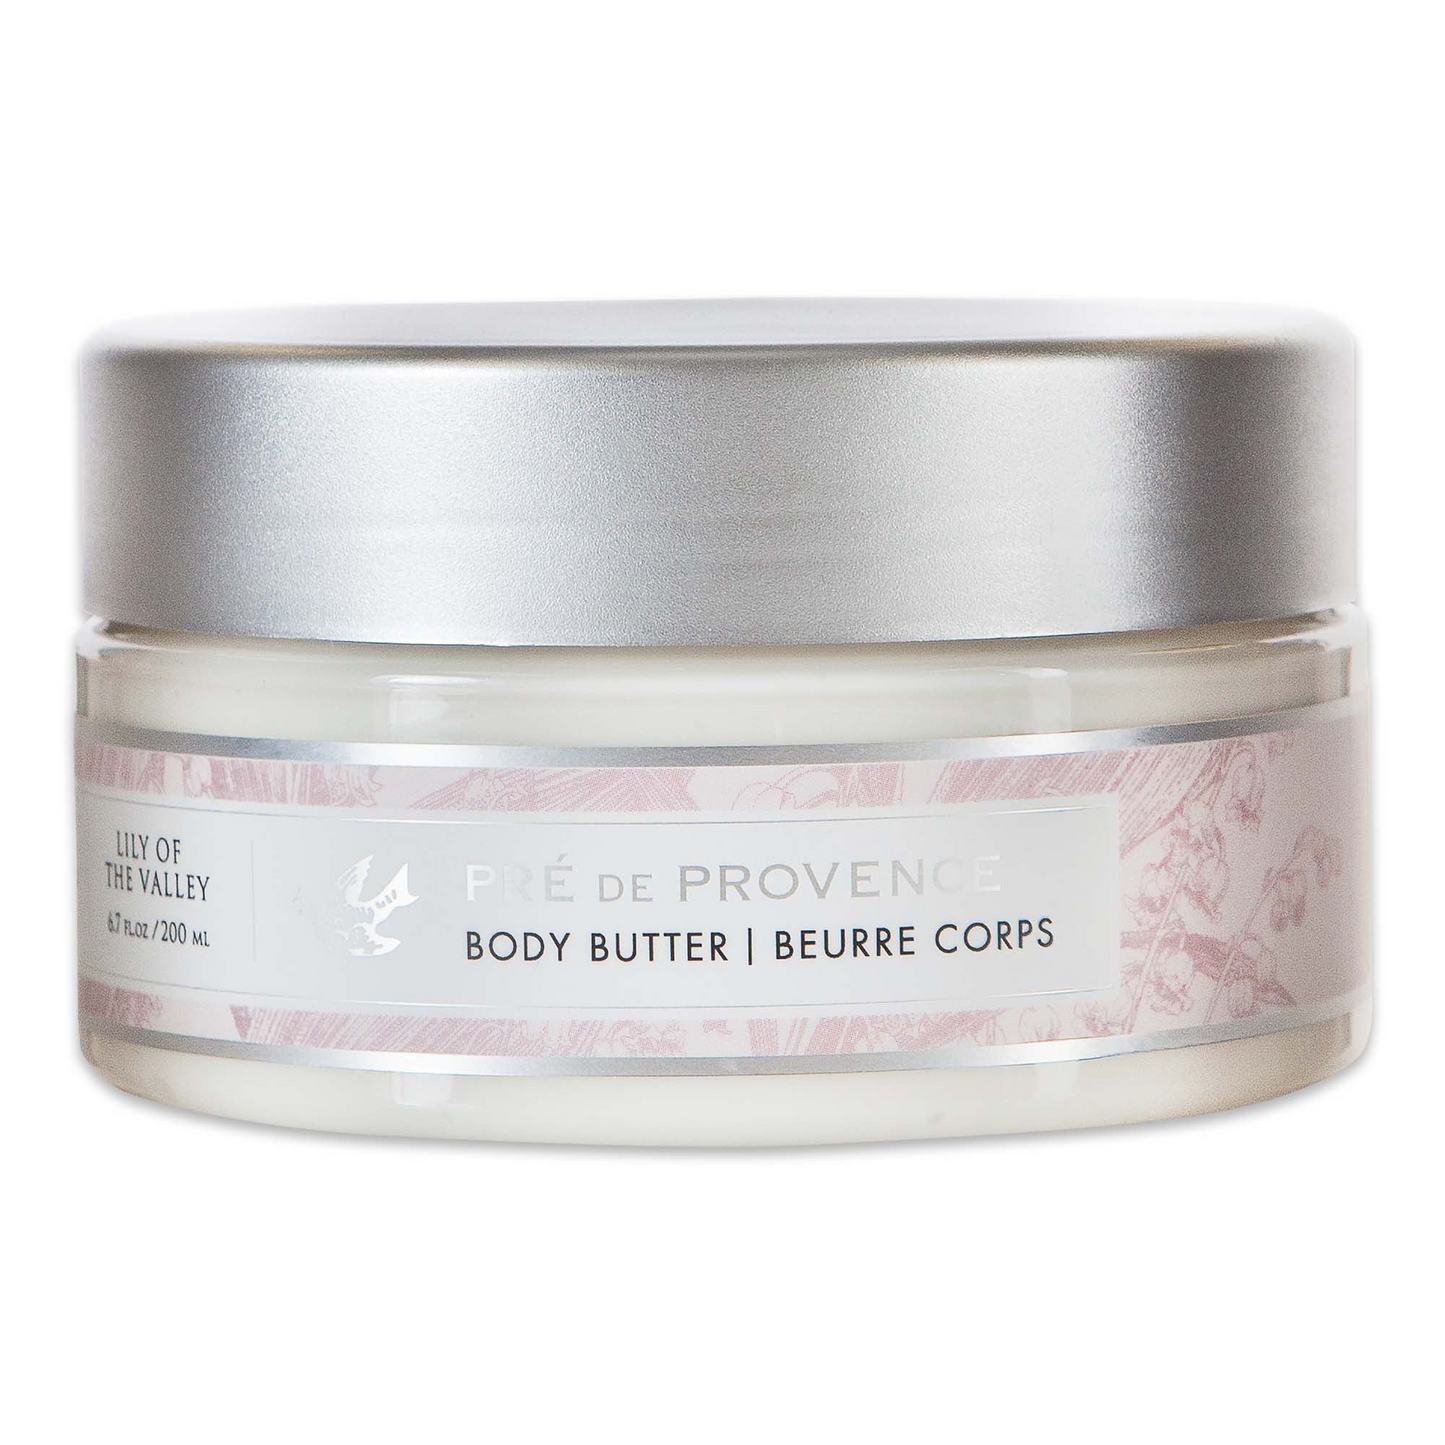 Primary Image of Body Butter - Lily of the Valley